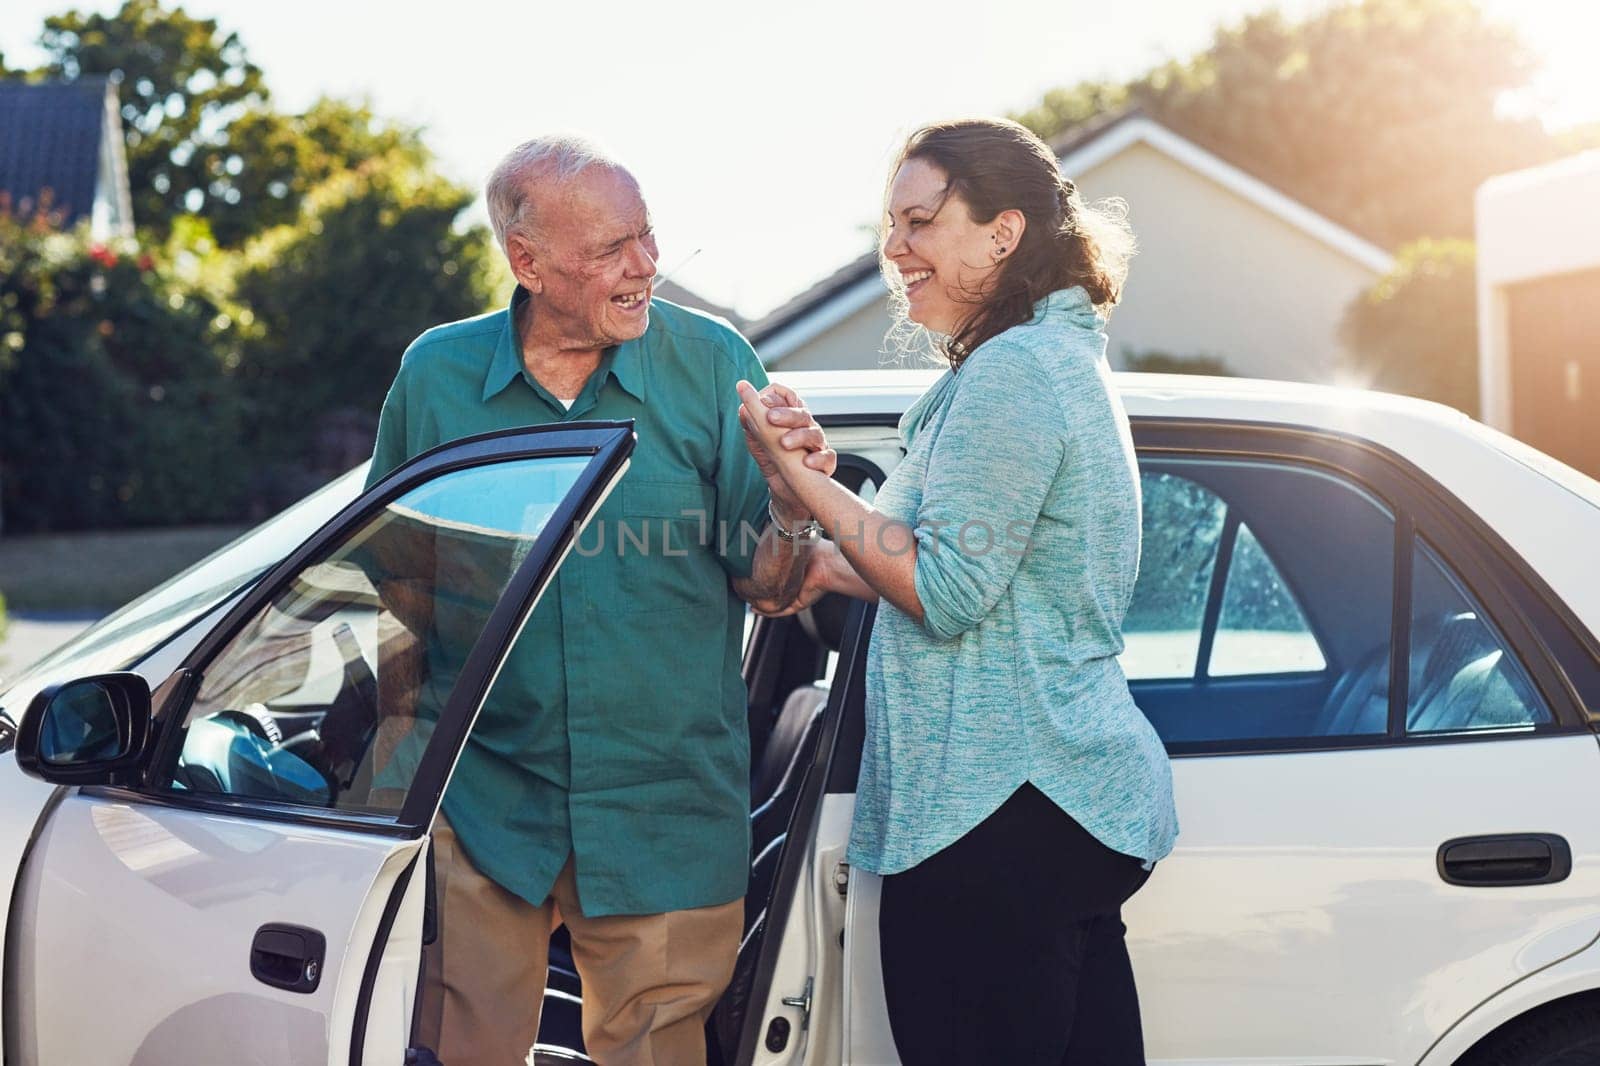 Car, help and caregiver woman with old man for assisted living, retirement care and rehabilitation. Travel, transportation and female helping elderly male person from motor vehicle for health service by YuriArcurs